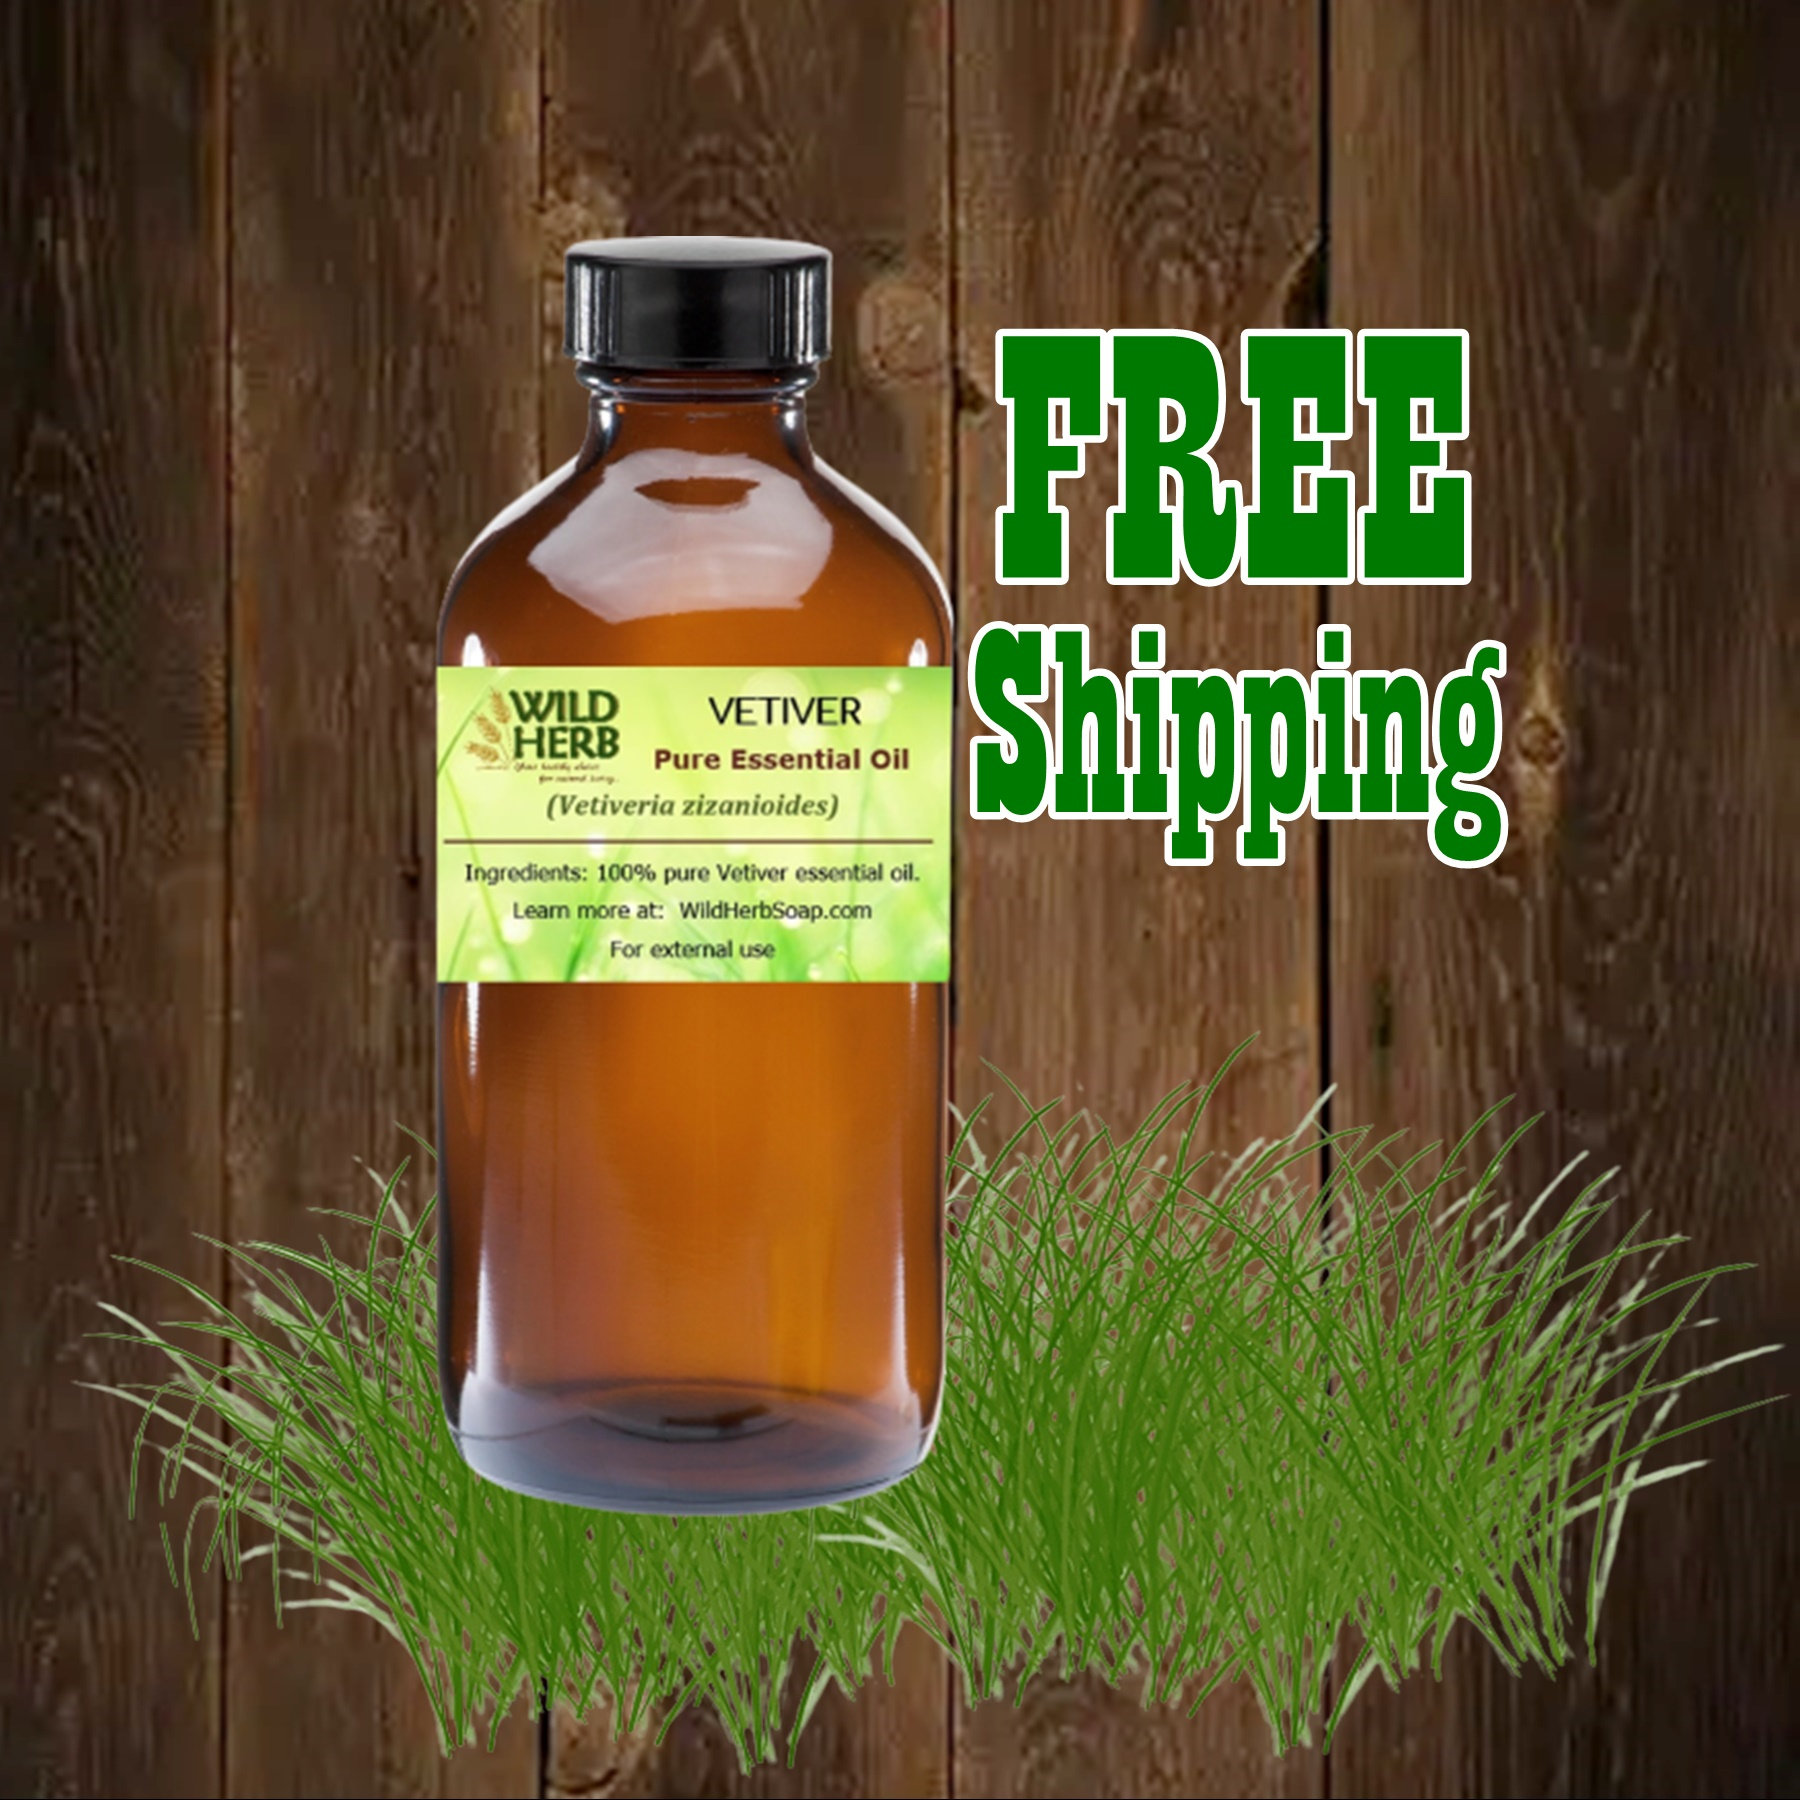  Rice Bran Oil (15oz.) by Nature's Oil - 100% Pure and Cold  Pressed Professional Massage Oil Or Carrier Oil for Diffusers. Great Skin  Moisturizer.